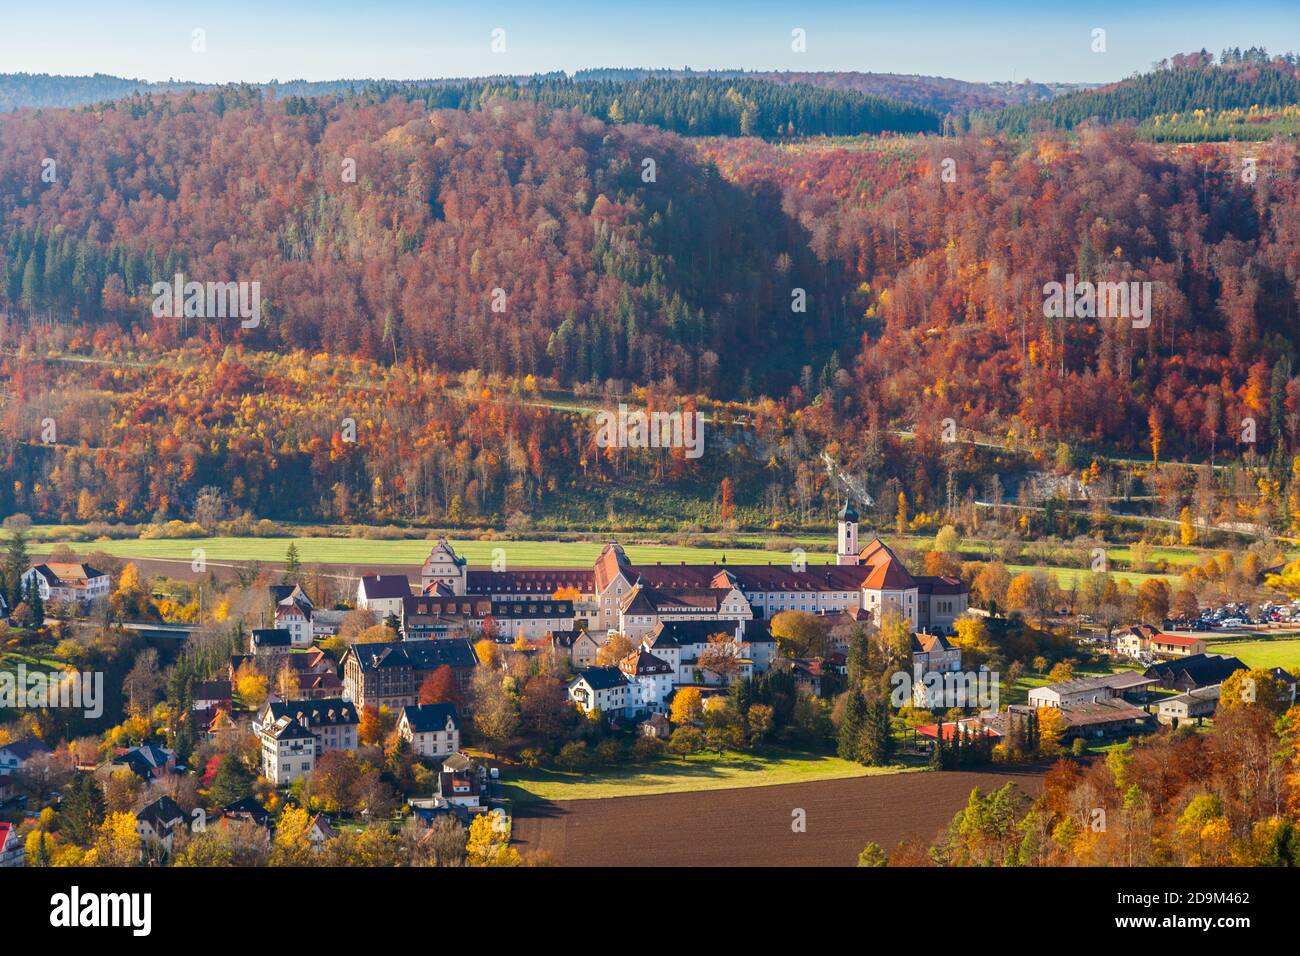 Beuron in upper Danube valley, Germany Stock Photo